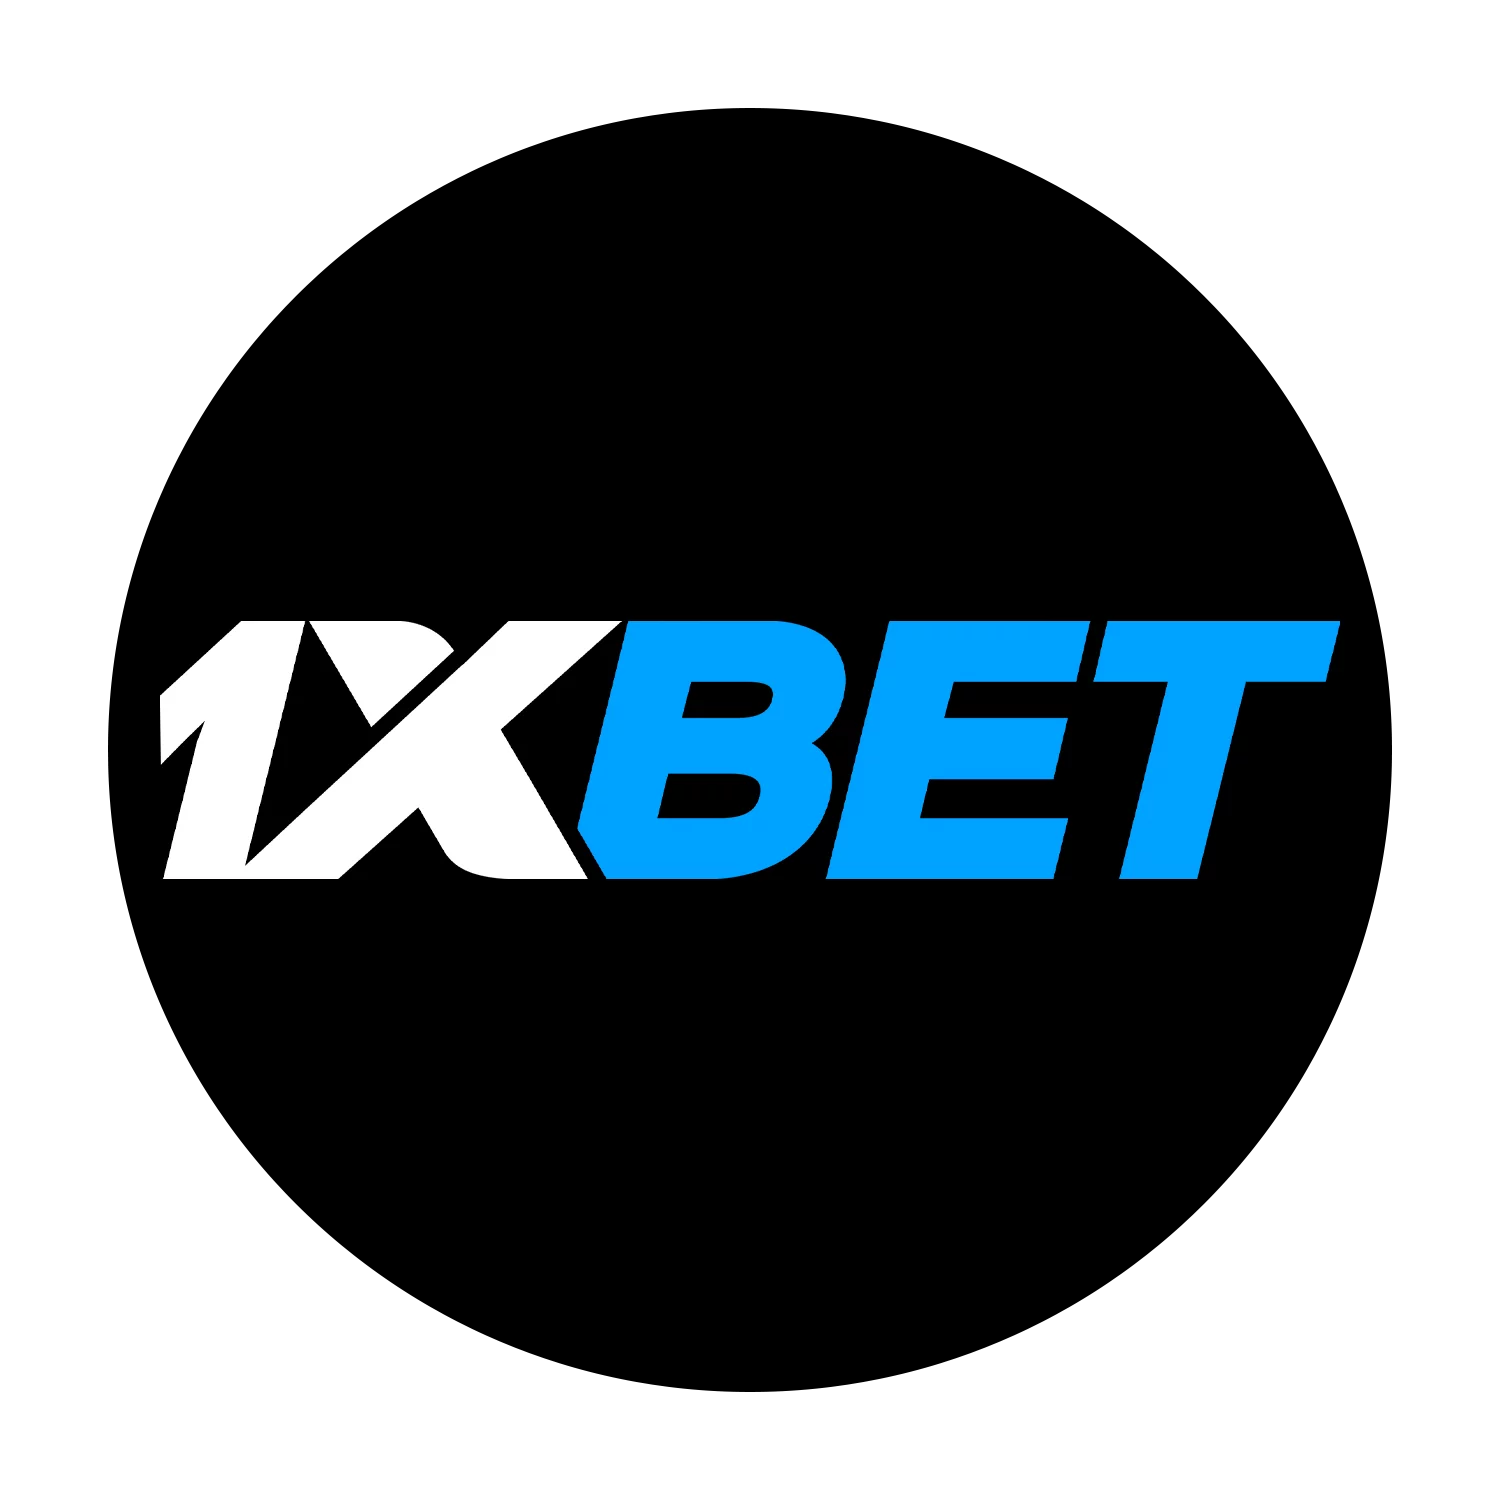 1xbet is one of the most popular casinos all over the world.